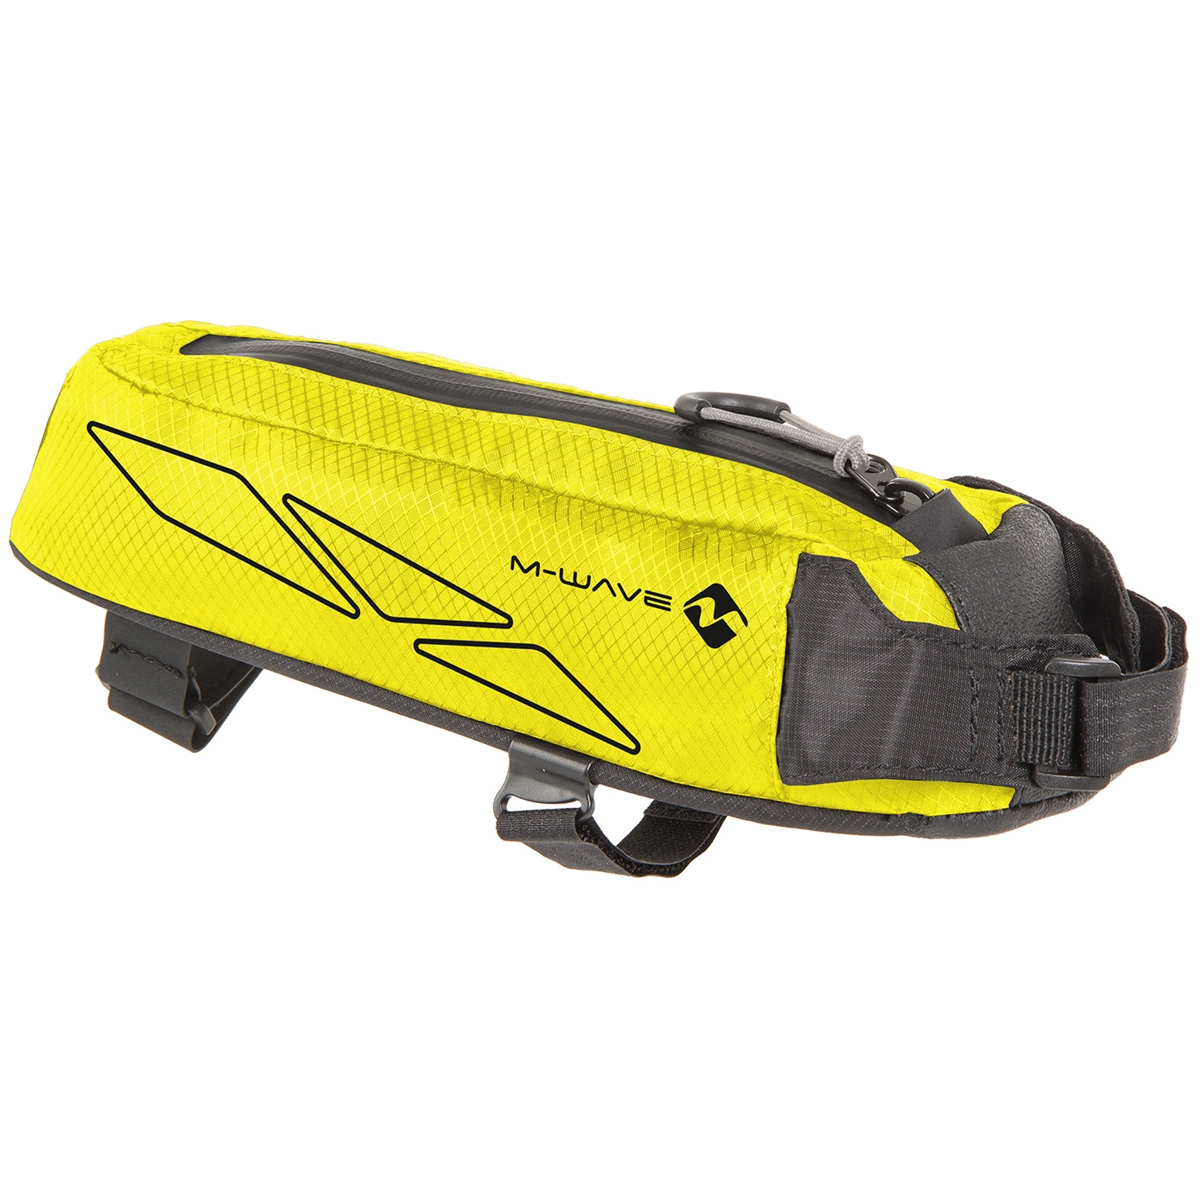 Front frame bag Rough Ride Top 0,7 liter yellow